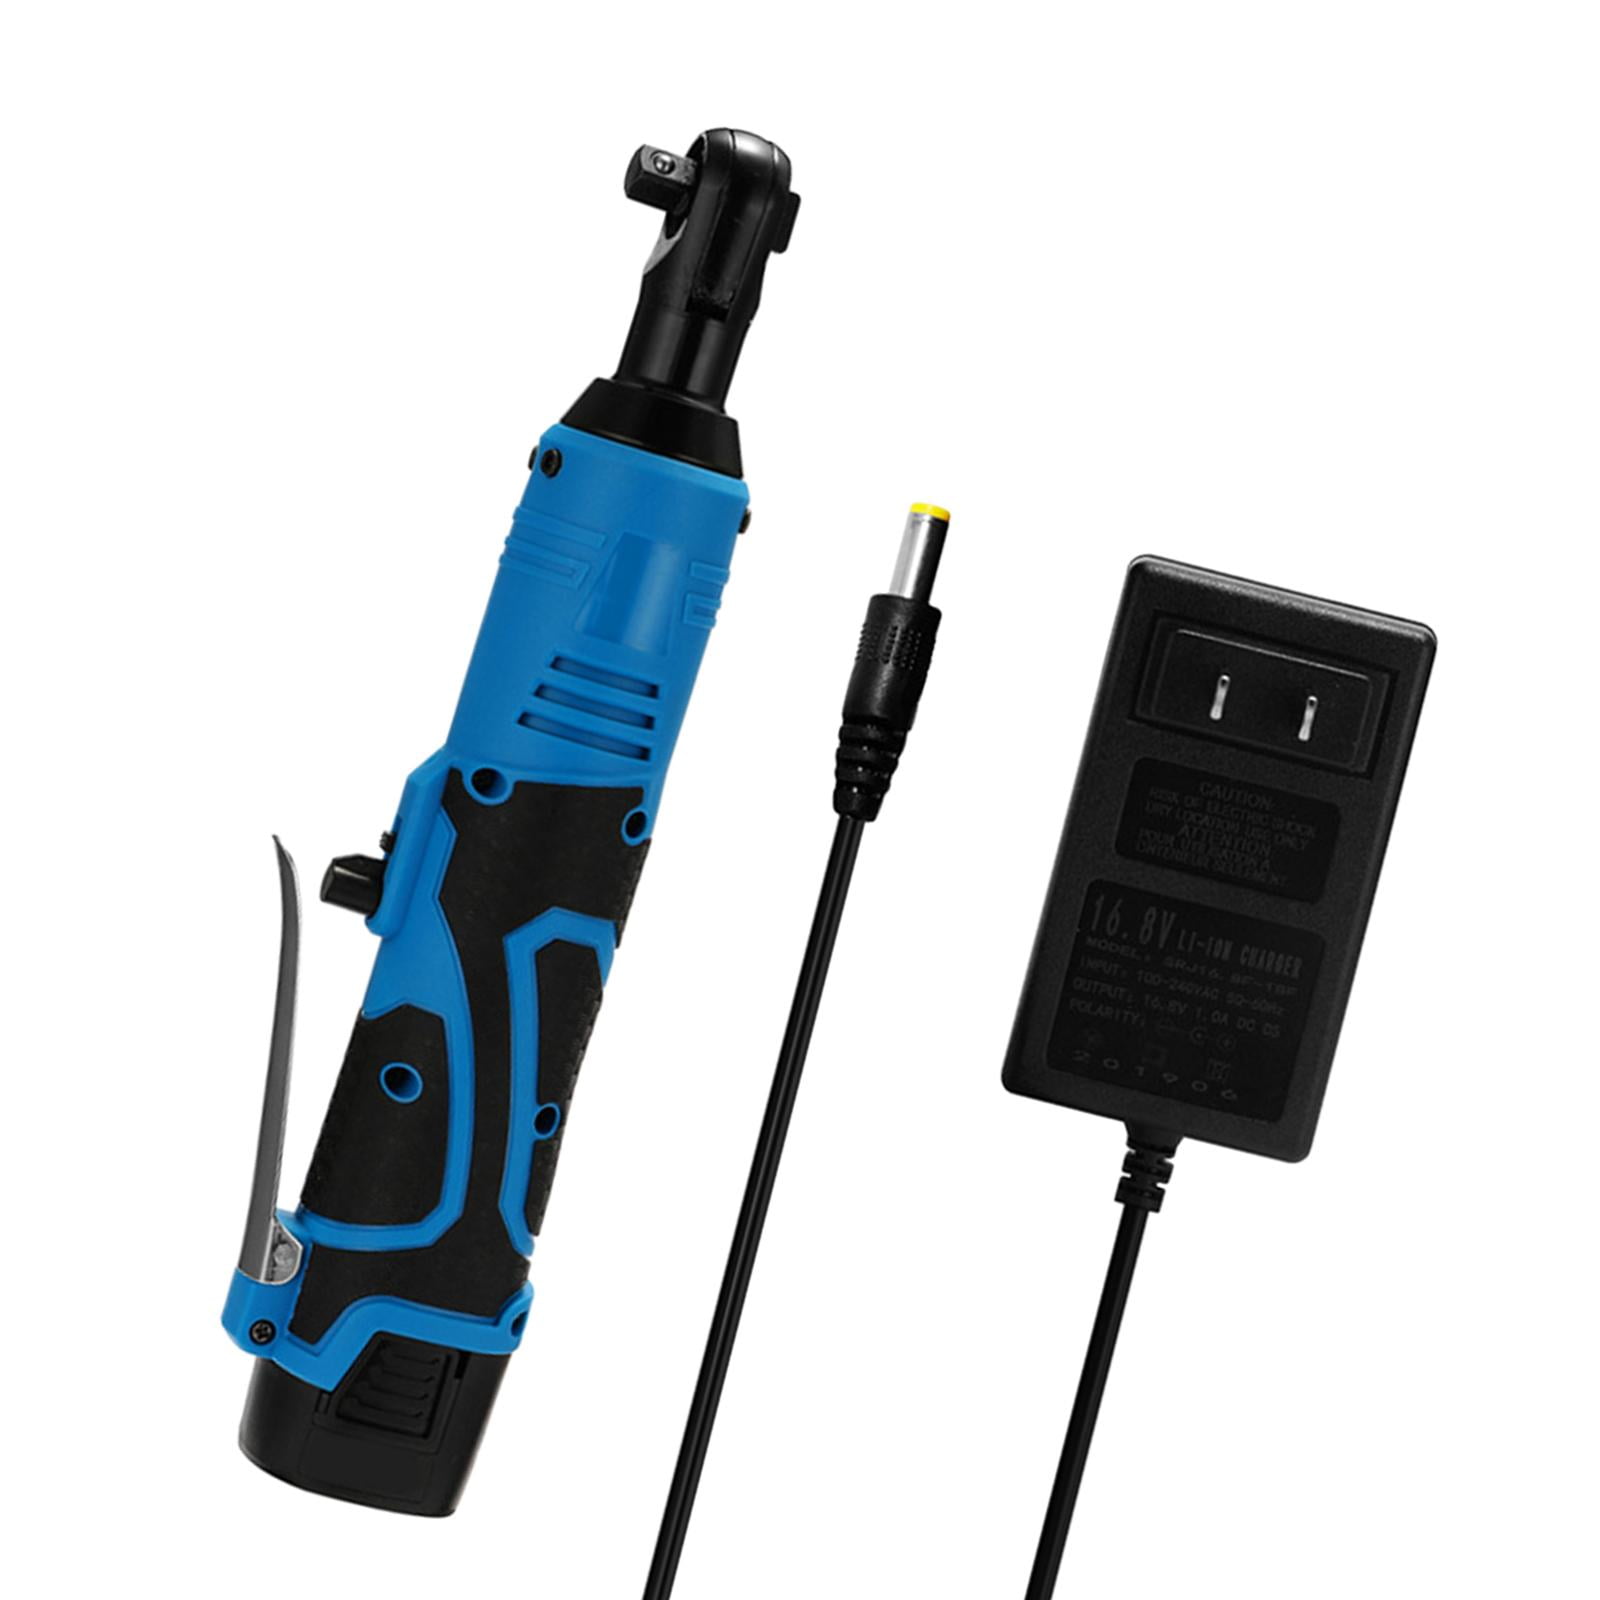 FLAT Charging Cable for Ryobi ERGO Cordless Screwdriver 4v Battery Charger 